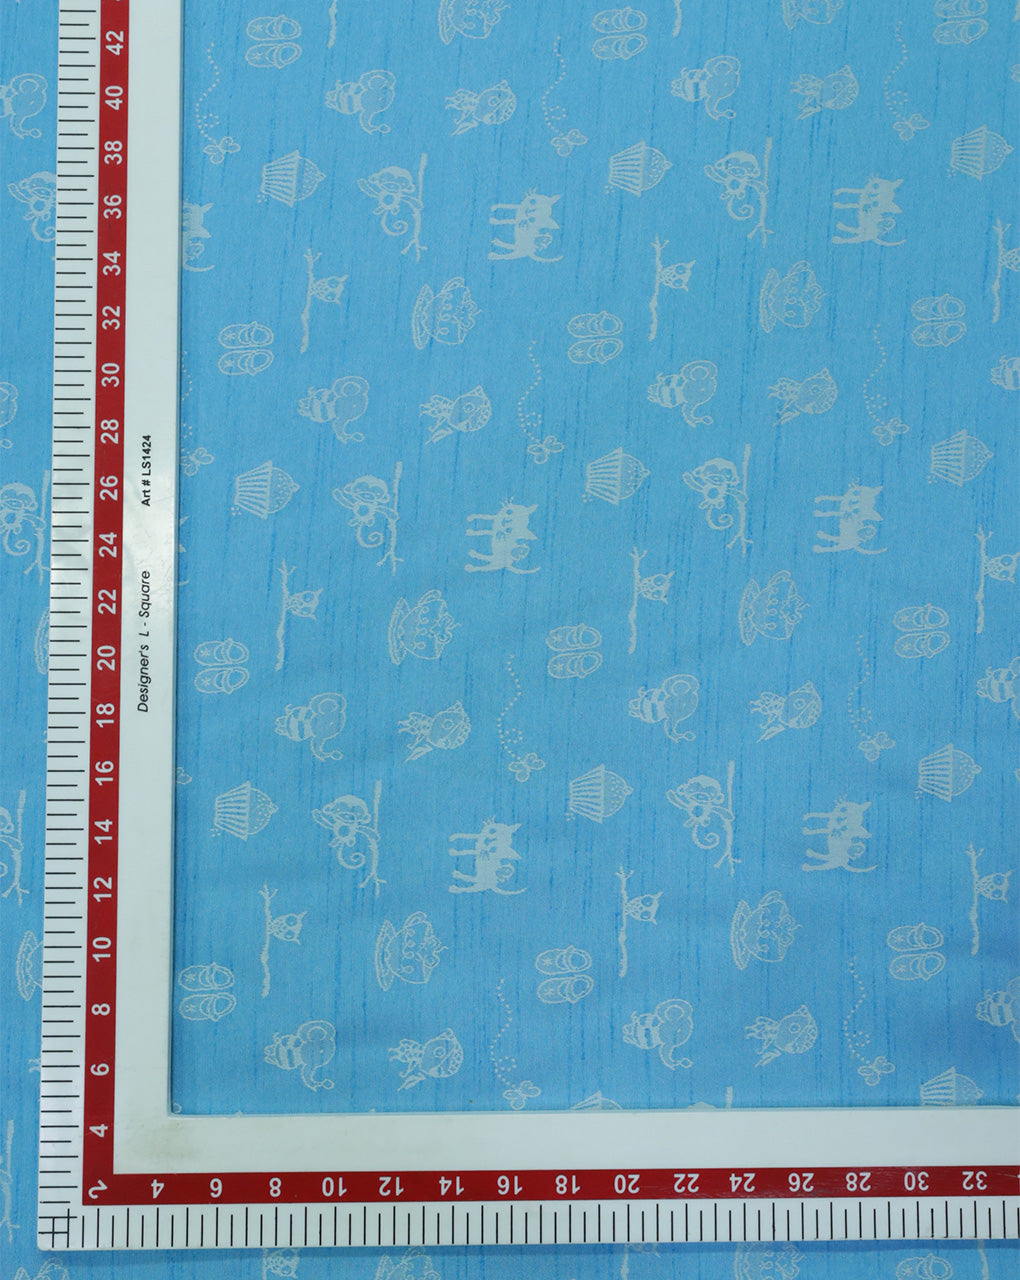 BLUE OBJECTS PATTERN POLYESTER JACQUARD FABRIC